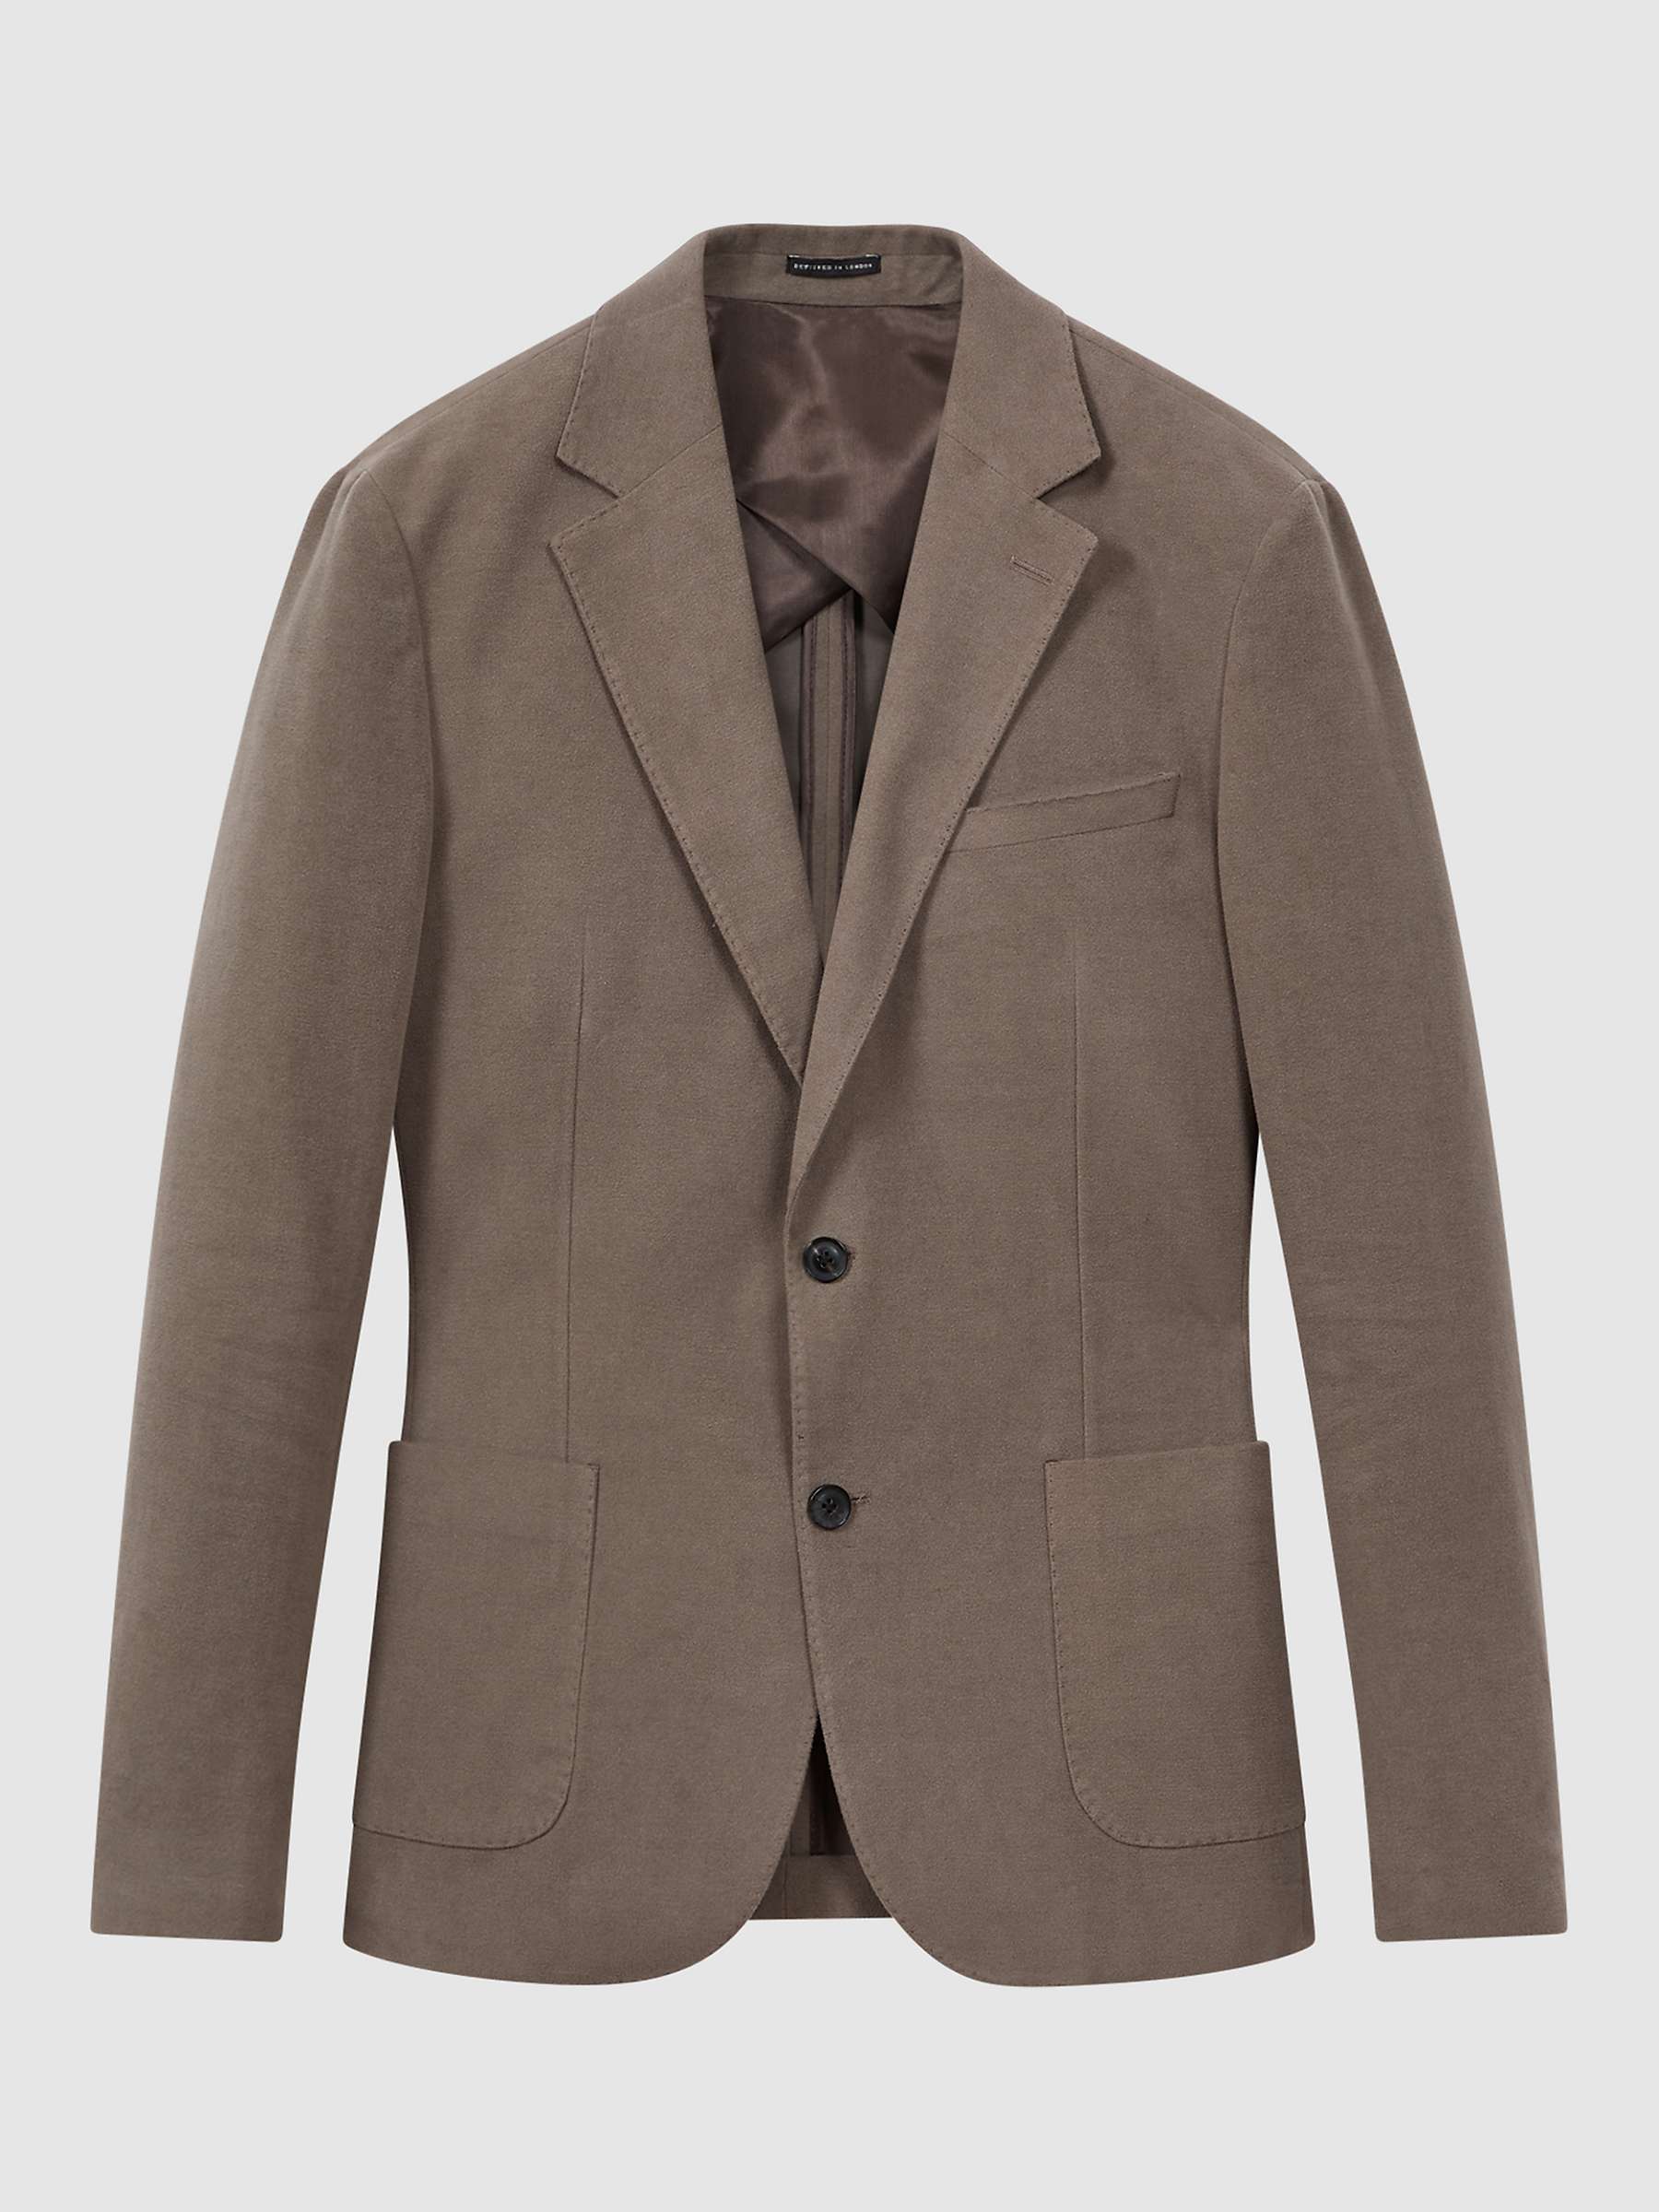 Buy Reiss Wall Tailored Fit Single Breasted Moleskin Blazer, Brown Online at johnlewis.com